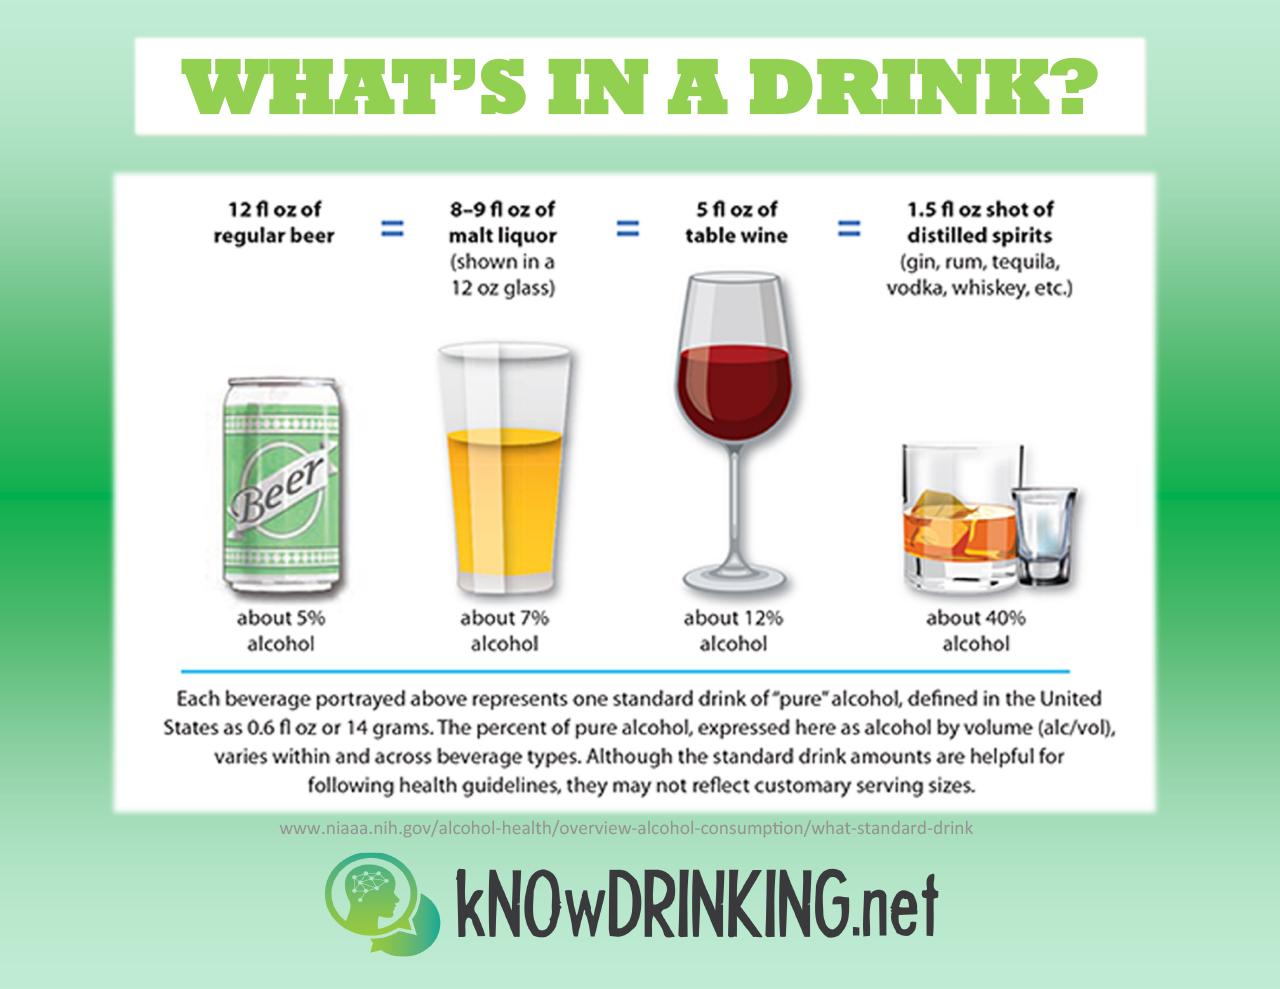 What's in a drink?